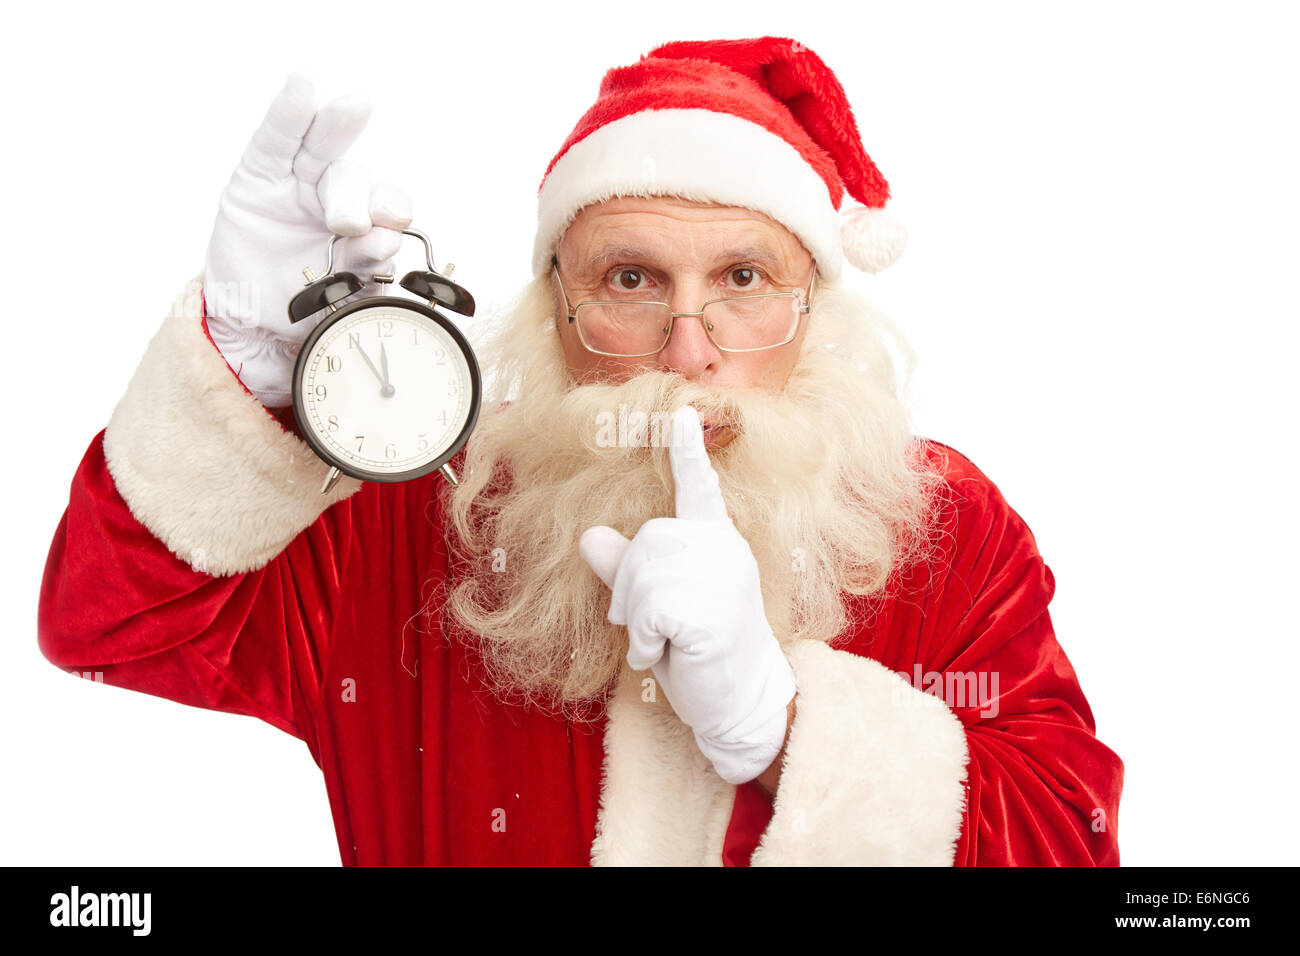 Santa Claus with alarm clock showing five minutes to midnight making shhh gesture and looking at camera Stock Photo